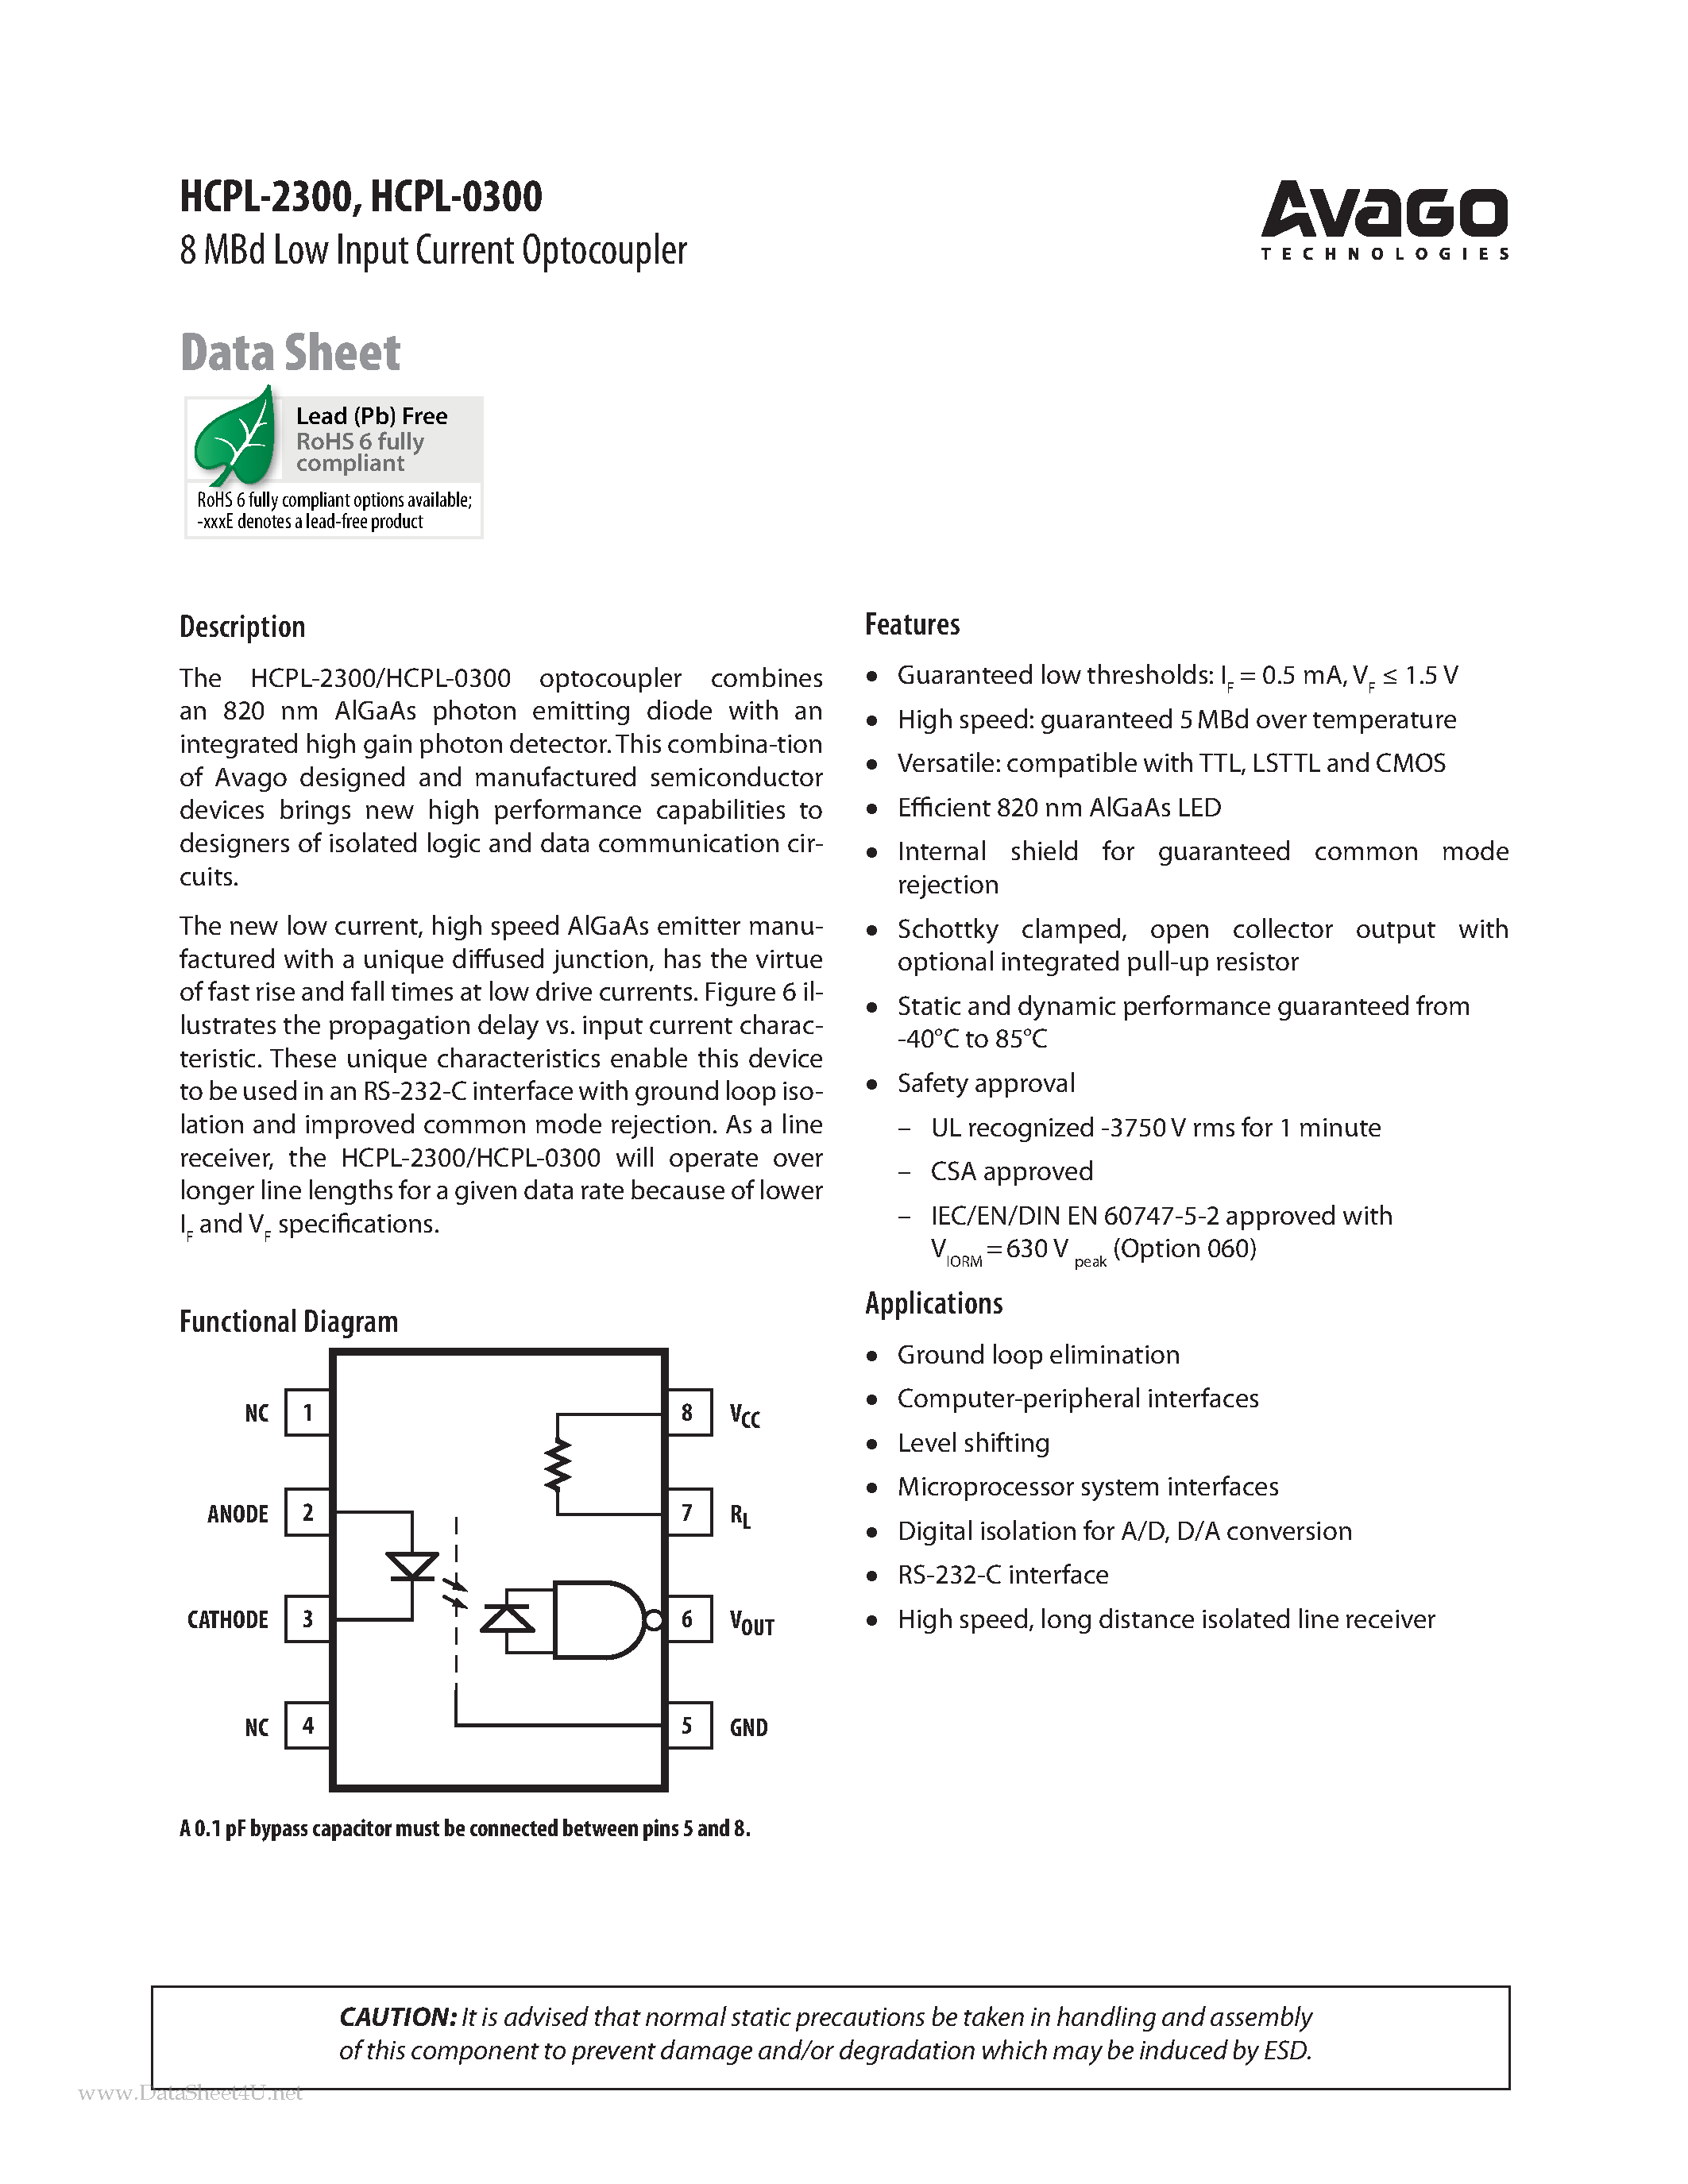 Datasheet HCPL-0300 - (HCPL-0300 / HCPL-2300) 8 MBd Low Input Current Optocoupler page 1